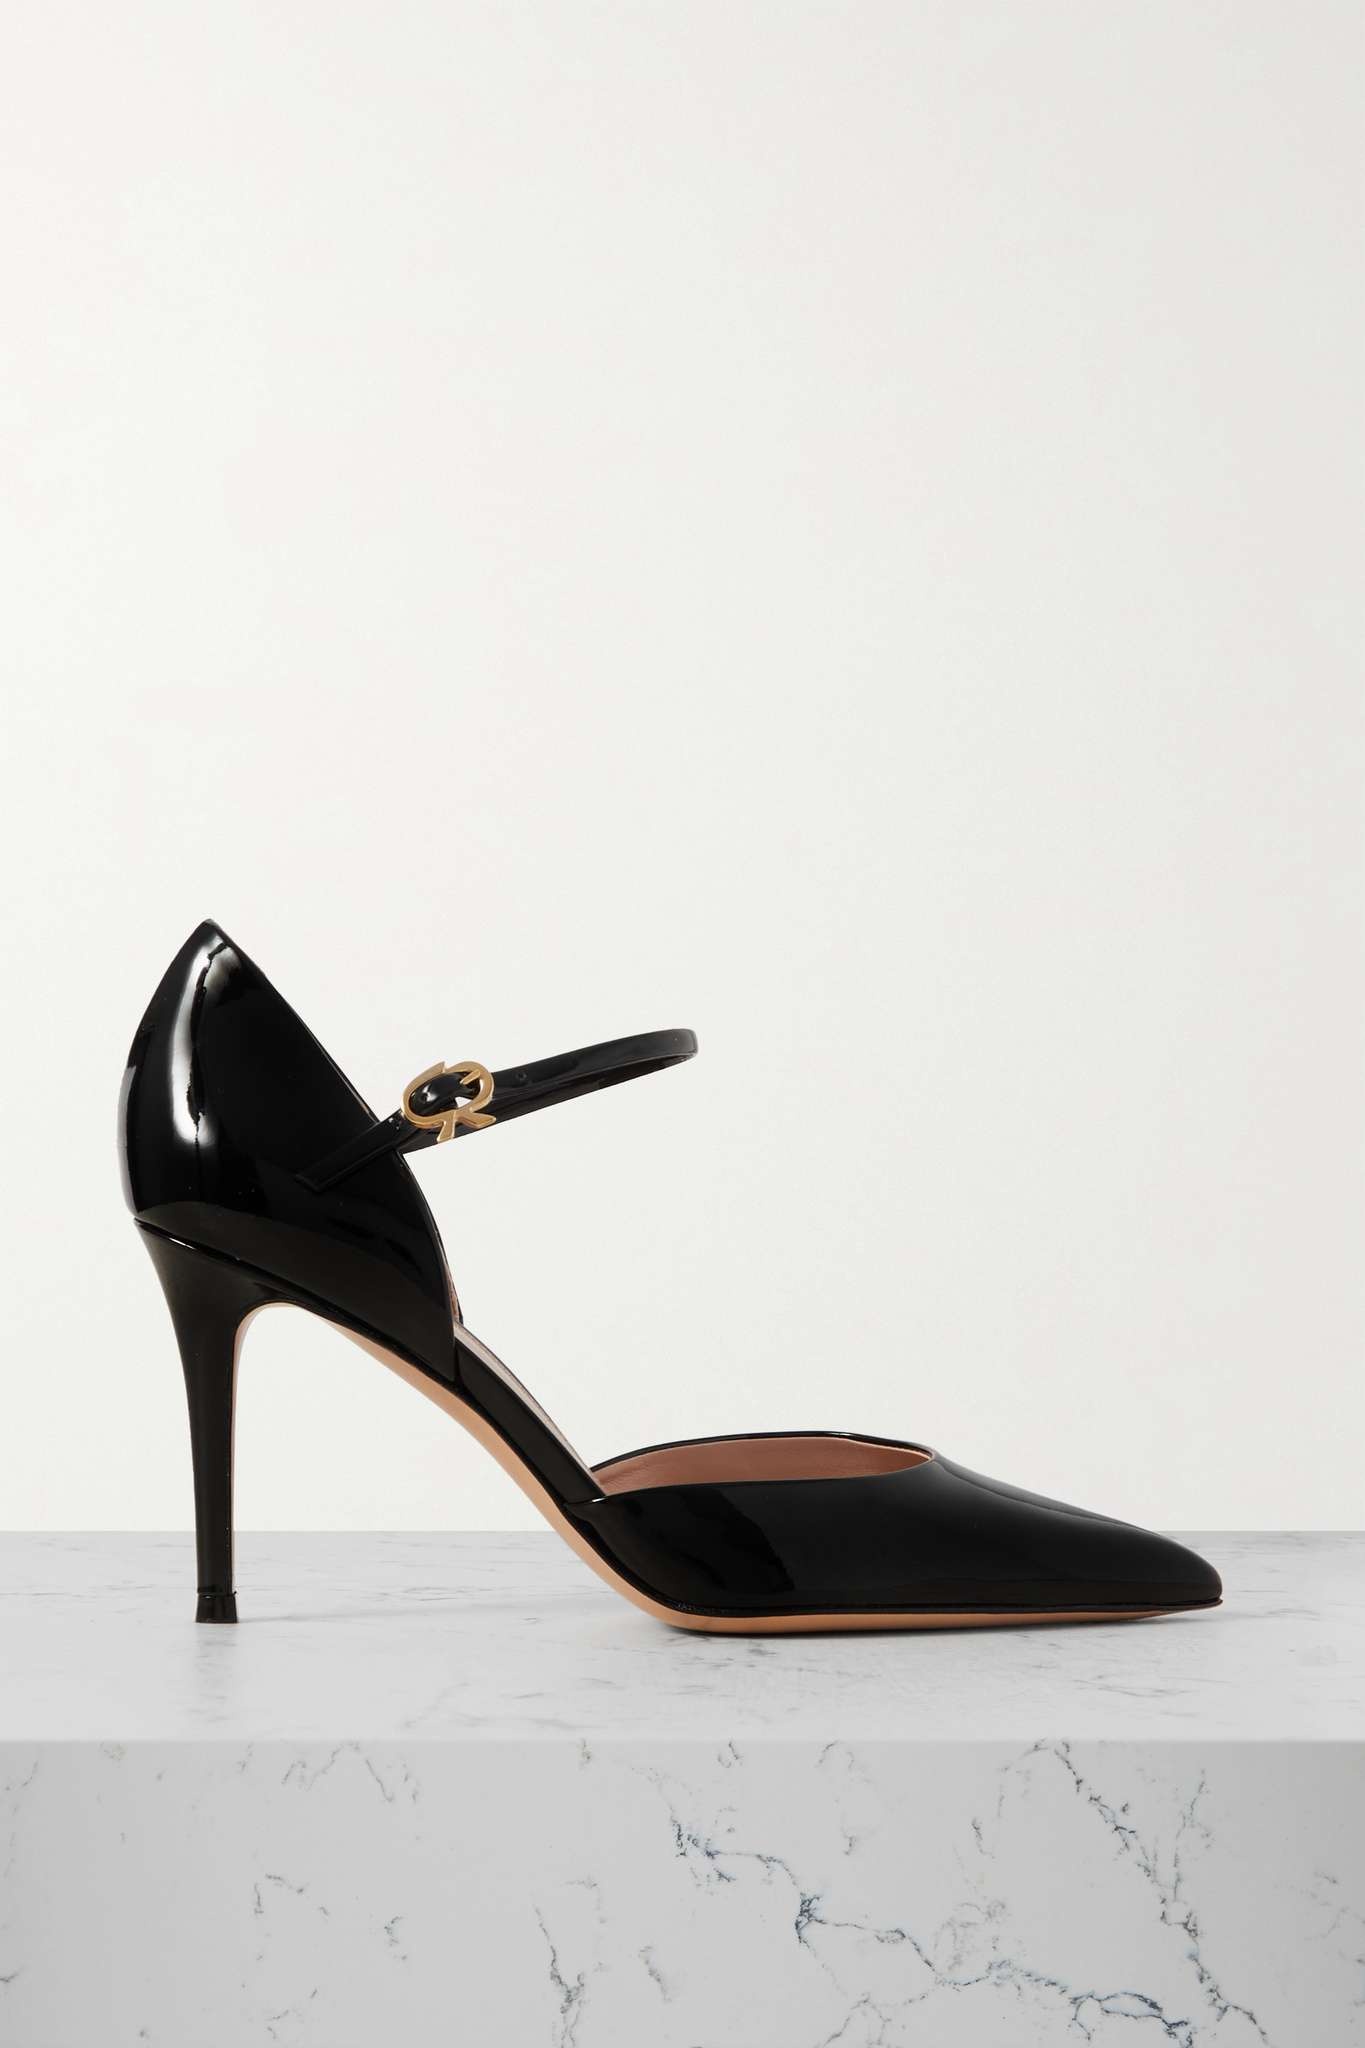 Gianvito Rossi Piper Anklet Leather Pumps in Black